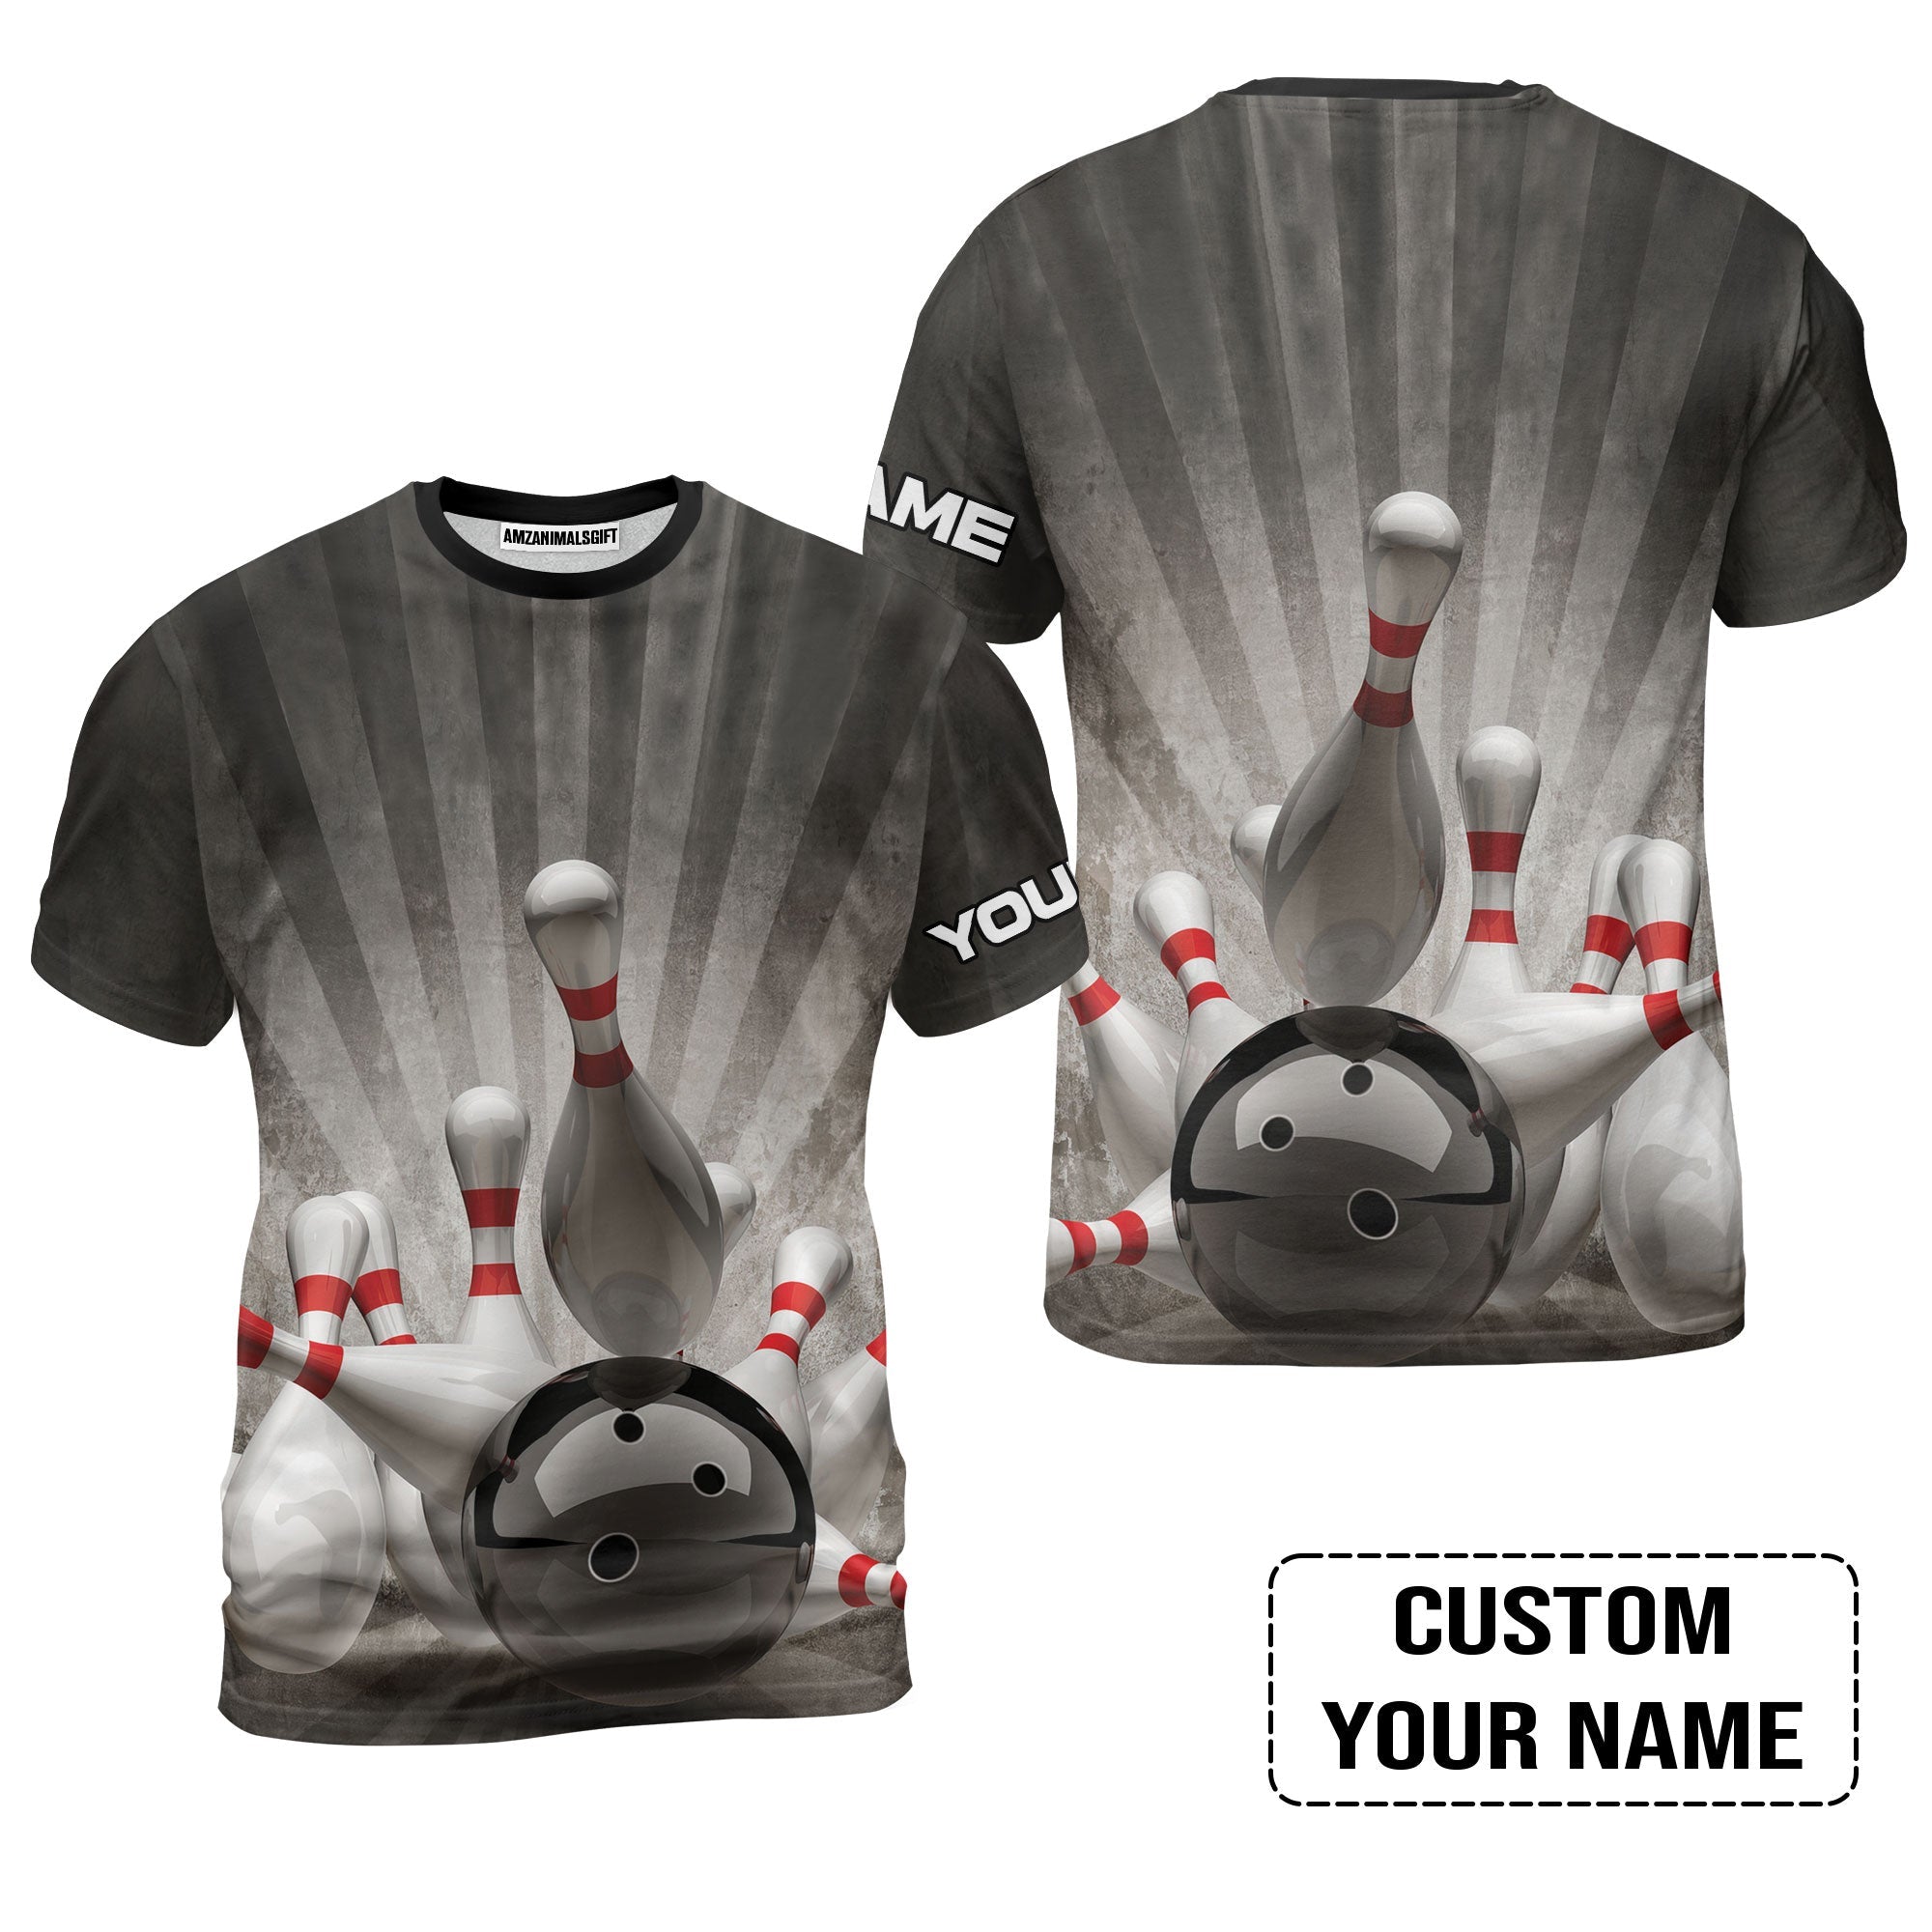 Bowling T-Shirt Customized Name, Colorful Bowling Pattern T-Shirt, Perfect Outfits For Bowling Lovers, Bowlers